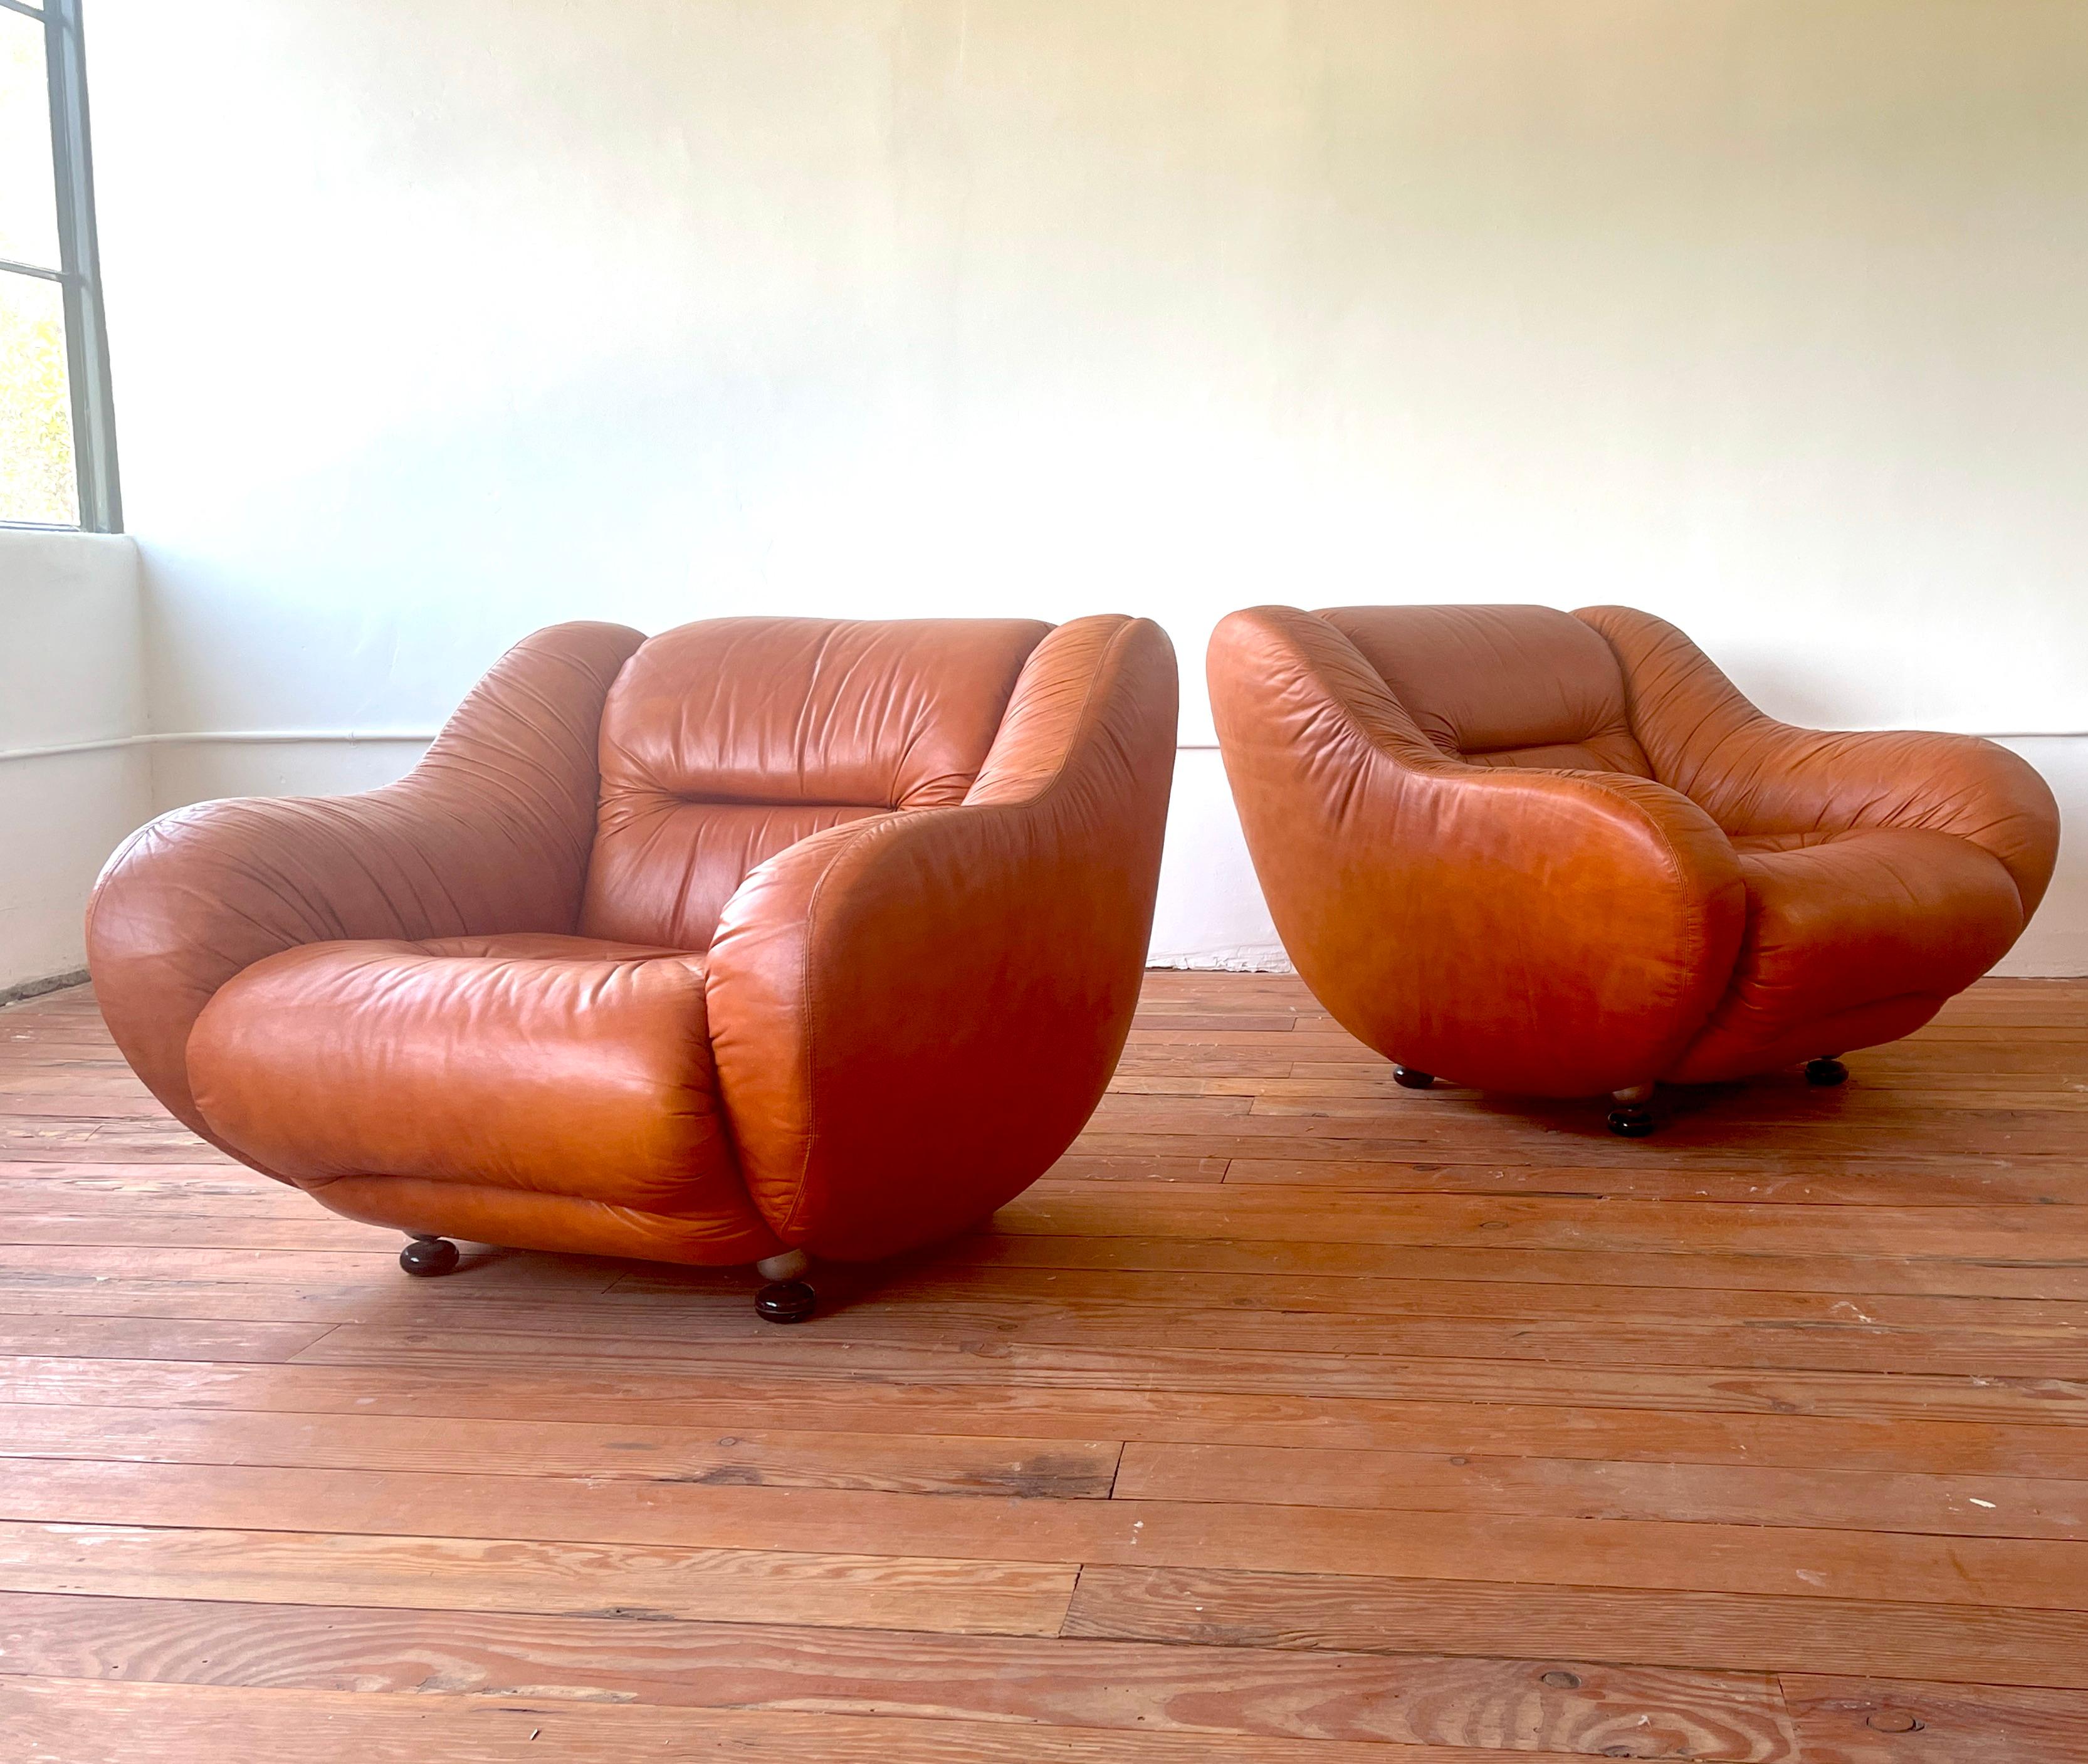 Incredible pair of Italian leather club chairs, Italy - 1950's
Soft carmel leather with sloped arms with floating wood ball shaped feet
Great sculptural form